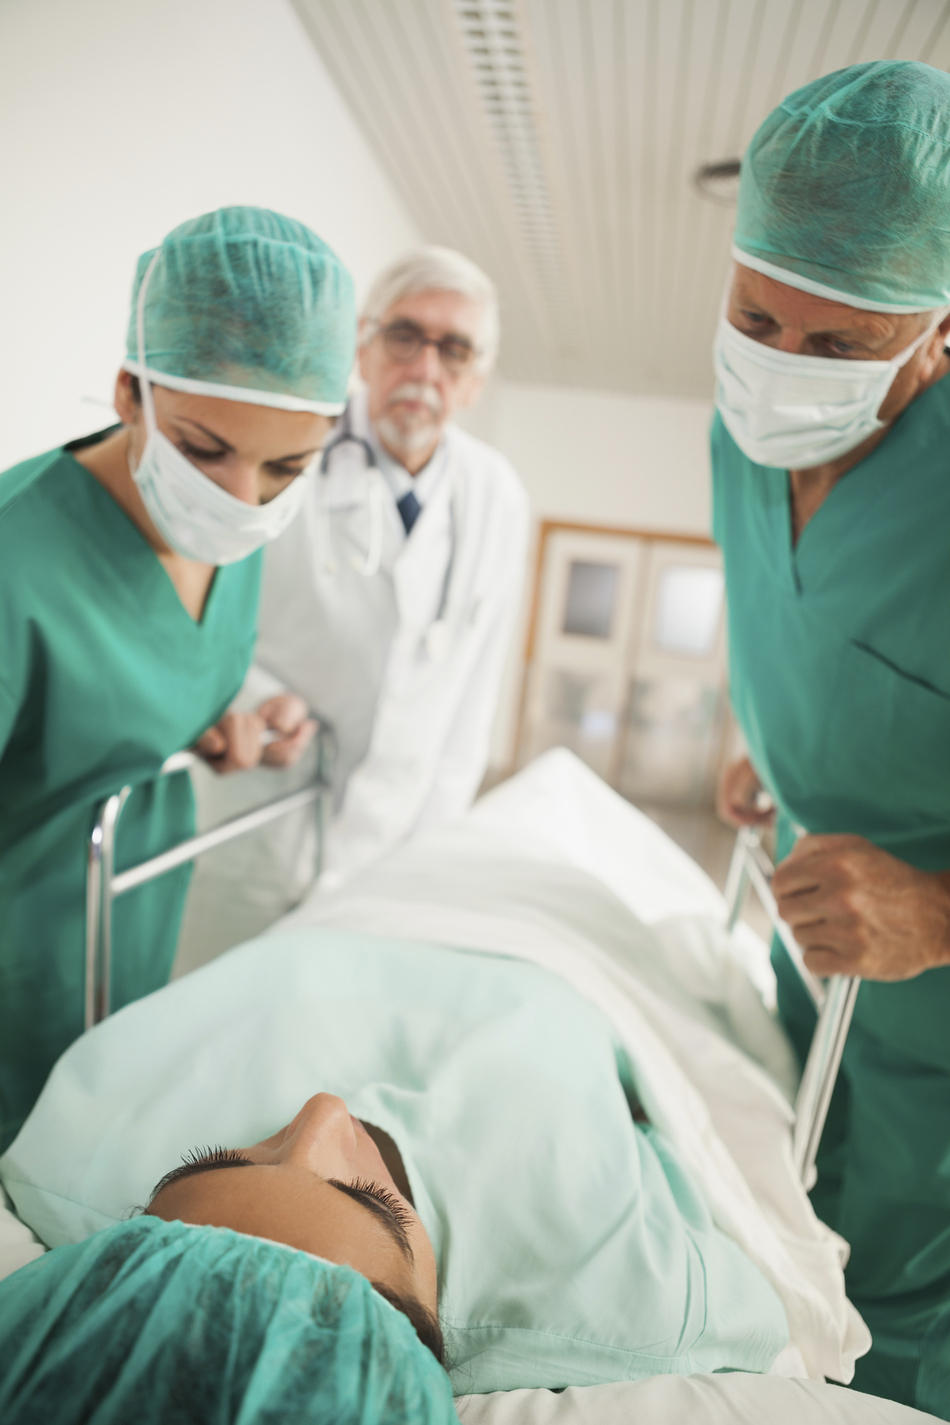 How to Identify and Treat Post-Surgery Infections